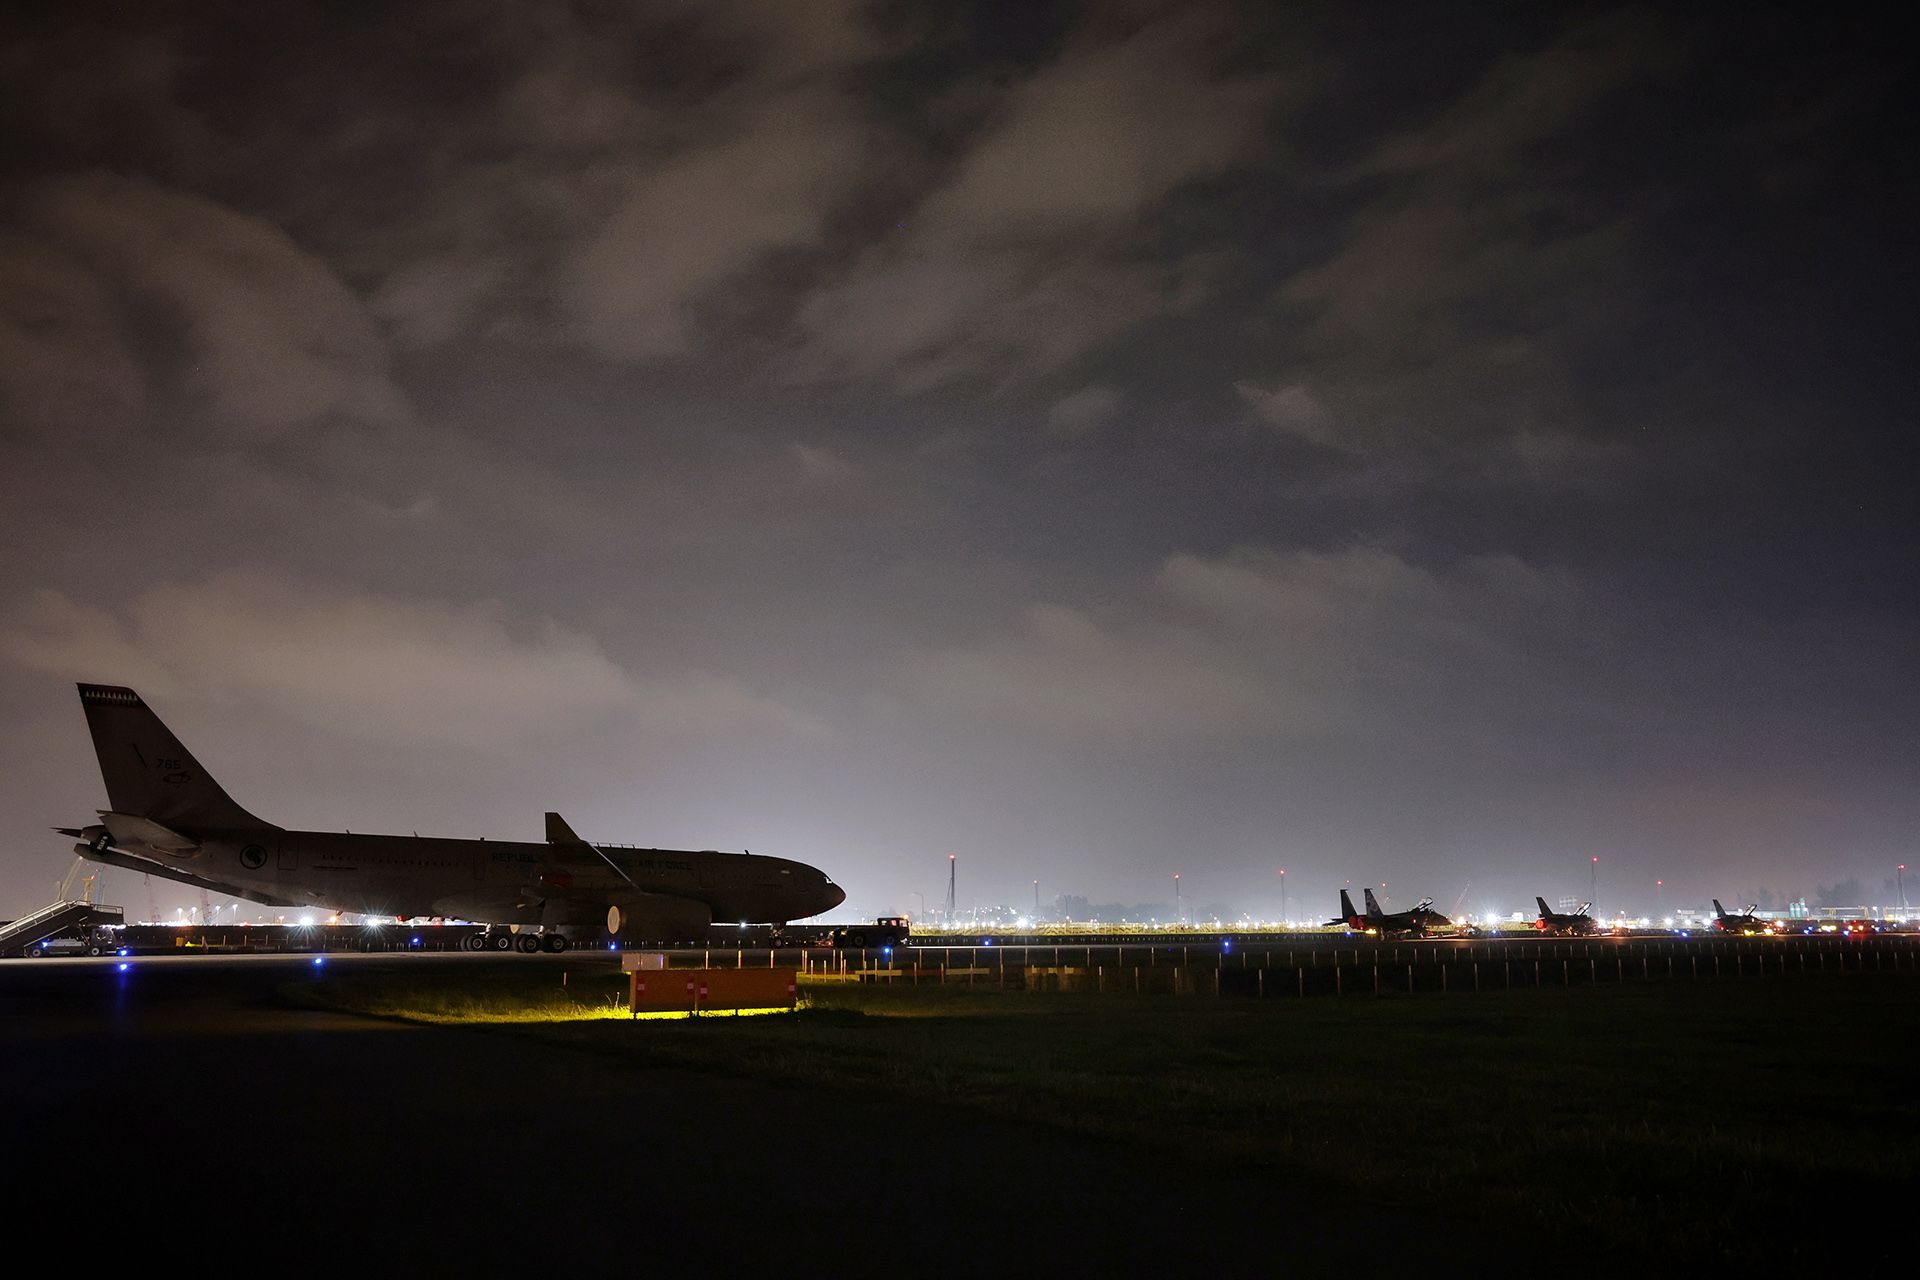 RSAF personnel carrying out night towing of the (from left) an A330 MRTT, an F-15SG, a F-16D and a F-16D+ from Changi Air Base (East) to Changi Exhibition Centre on Feb 13. ST PHOTO: KEVIN LIM